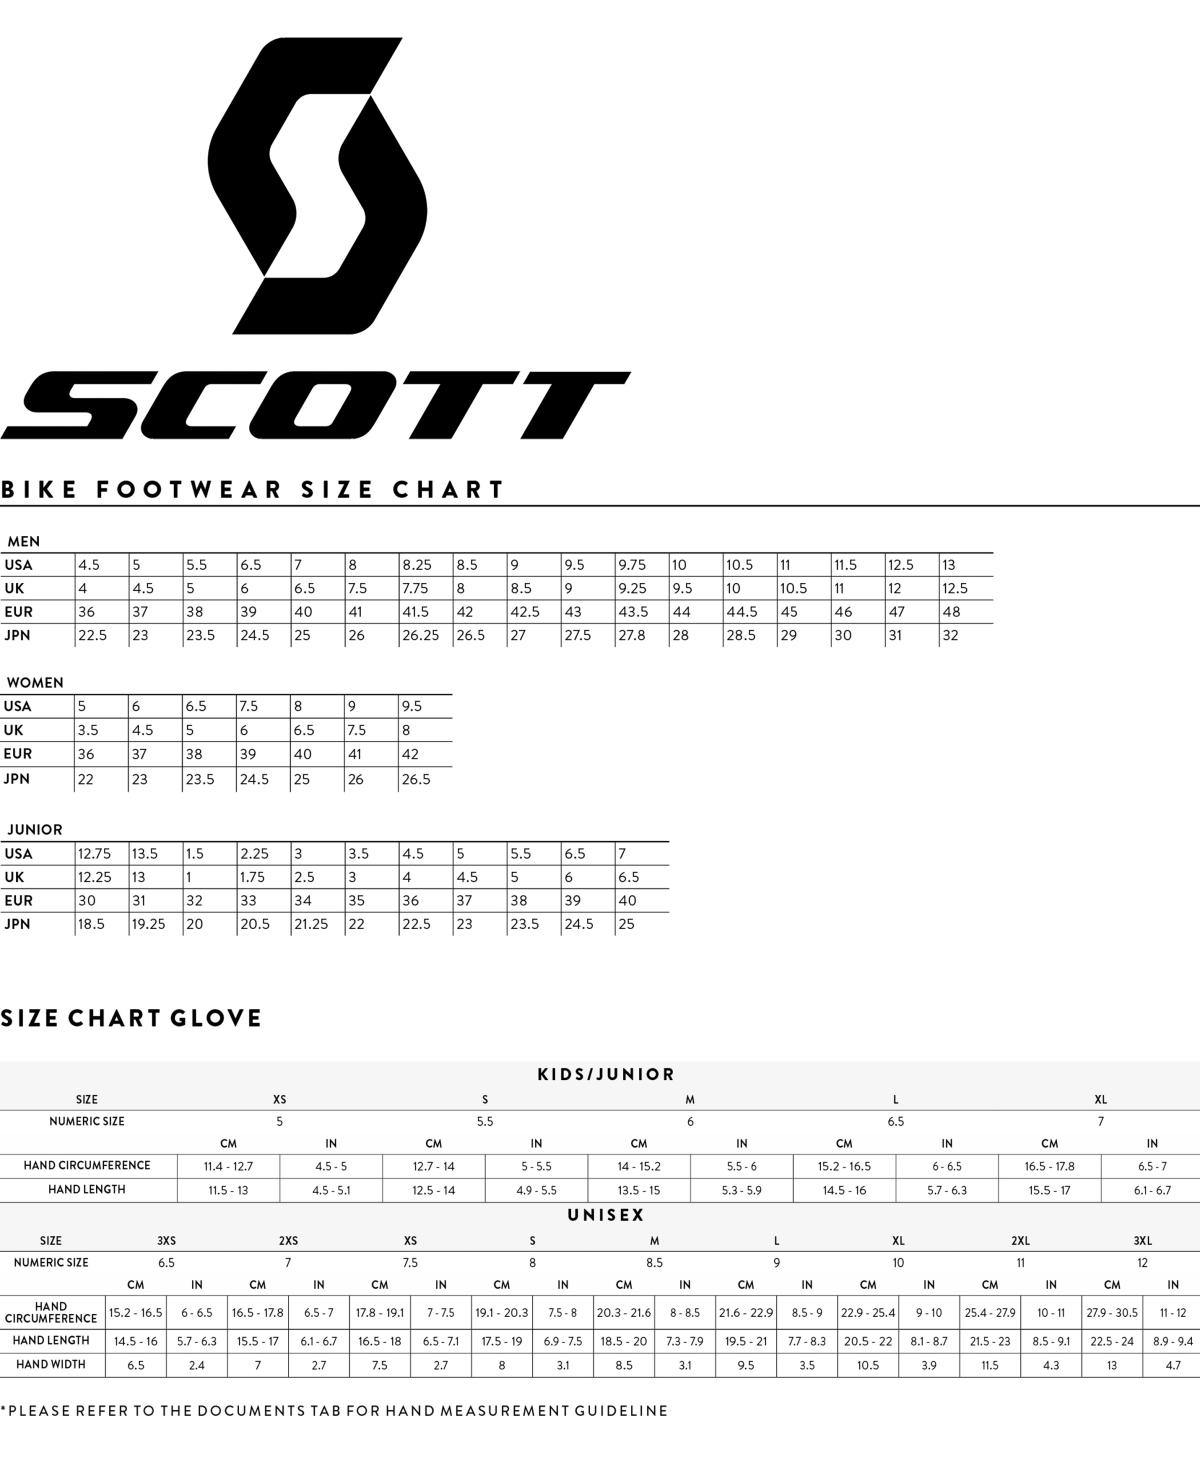 Scott gloves and shoes size chart